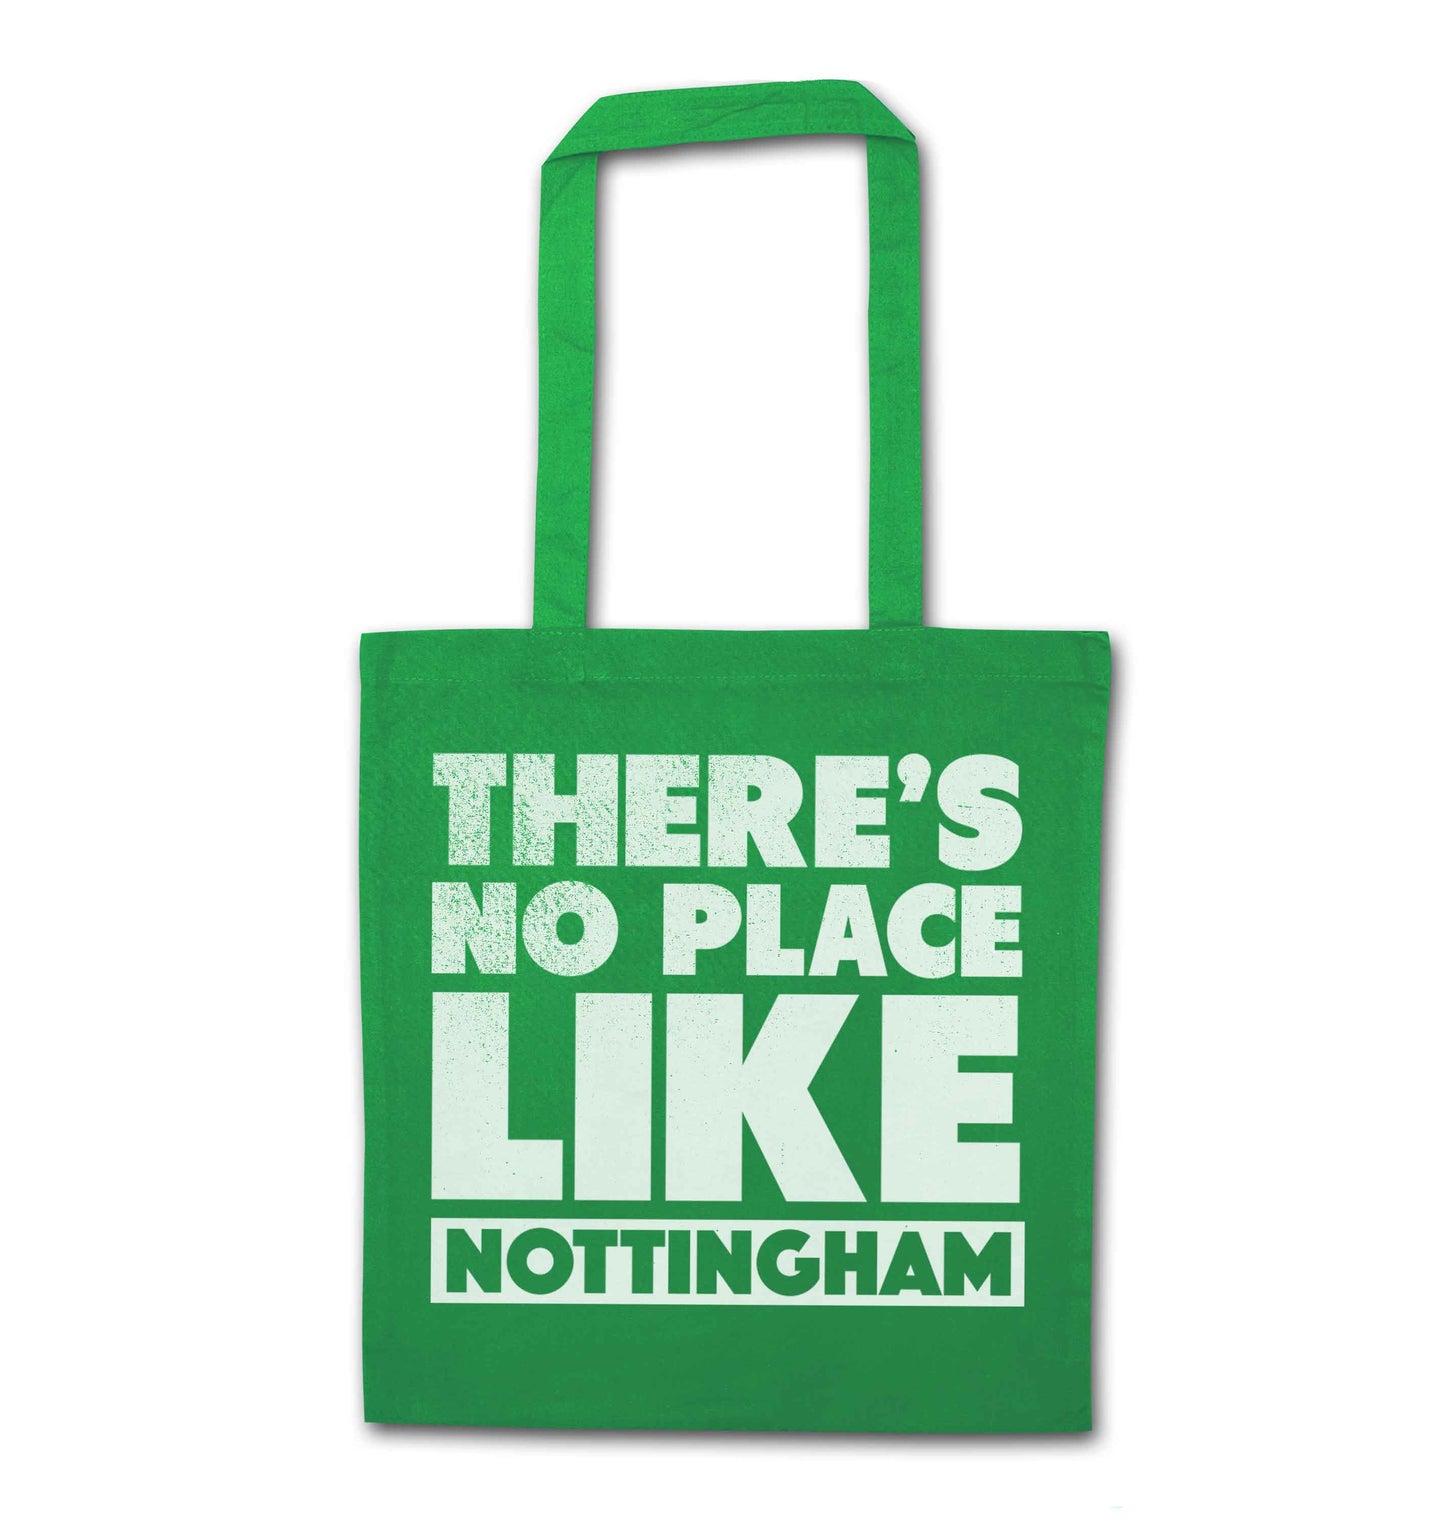 There's no place like Nottingham green tote bag